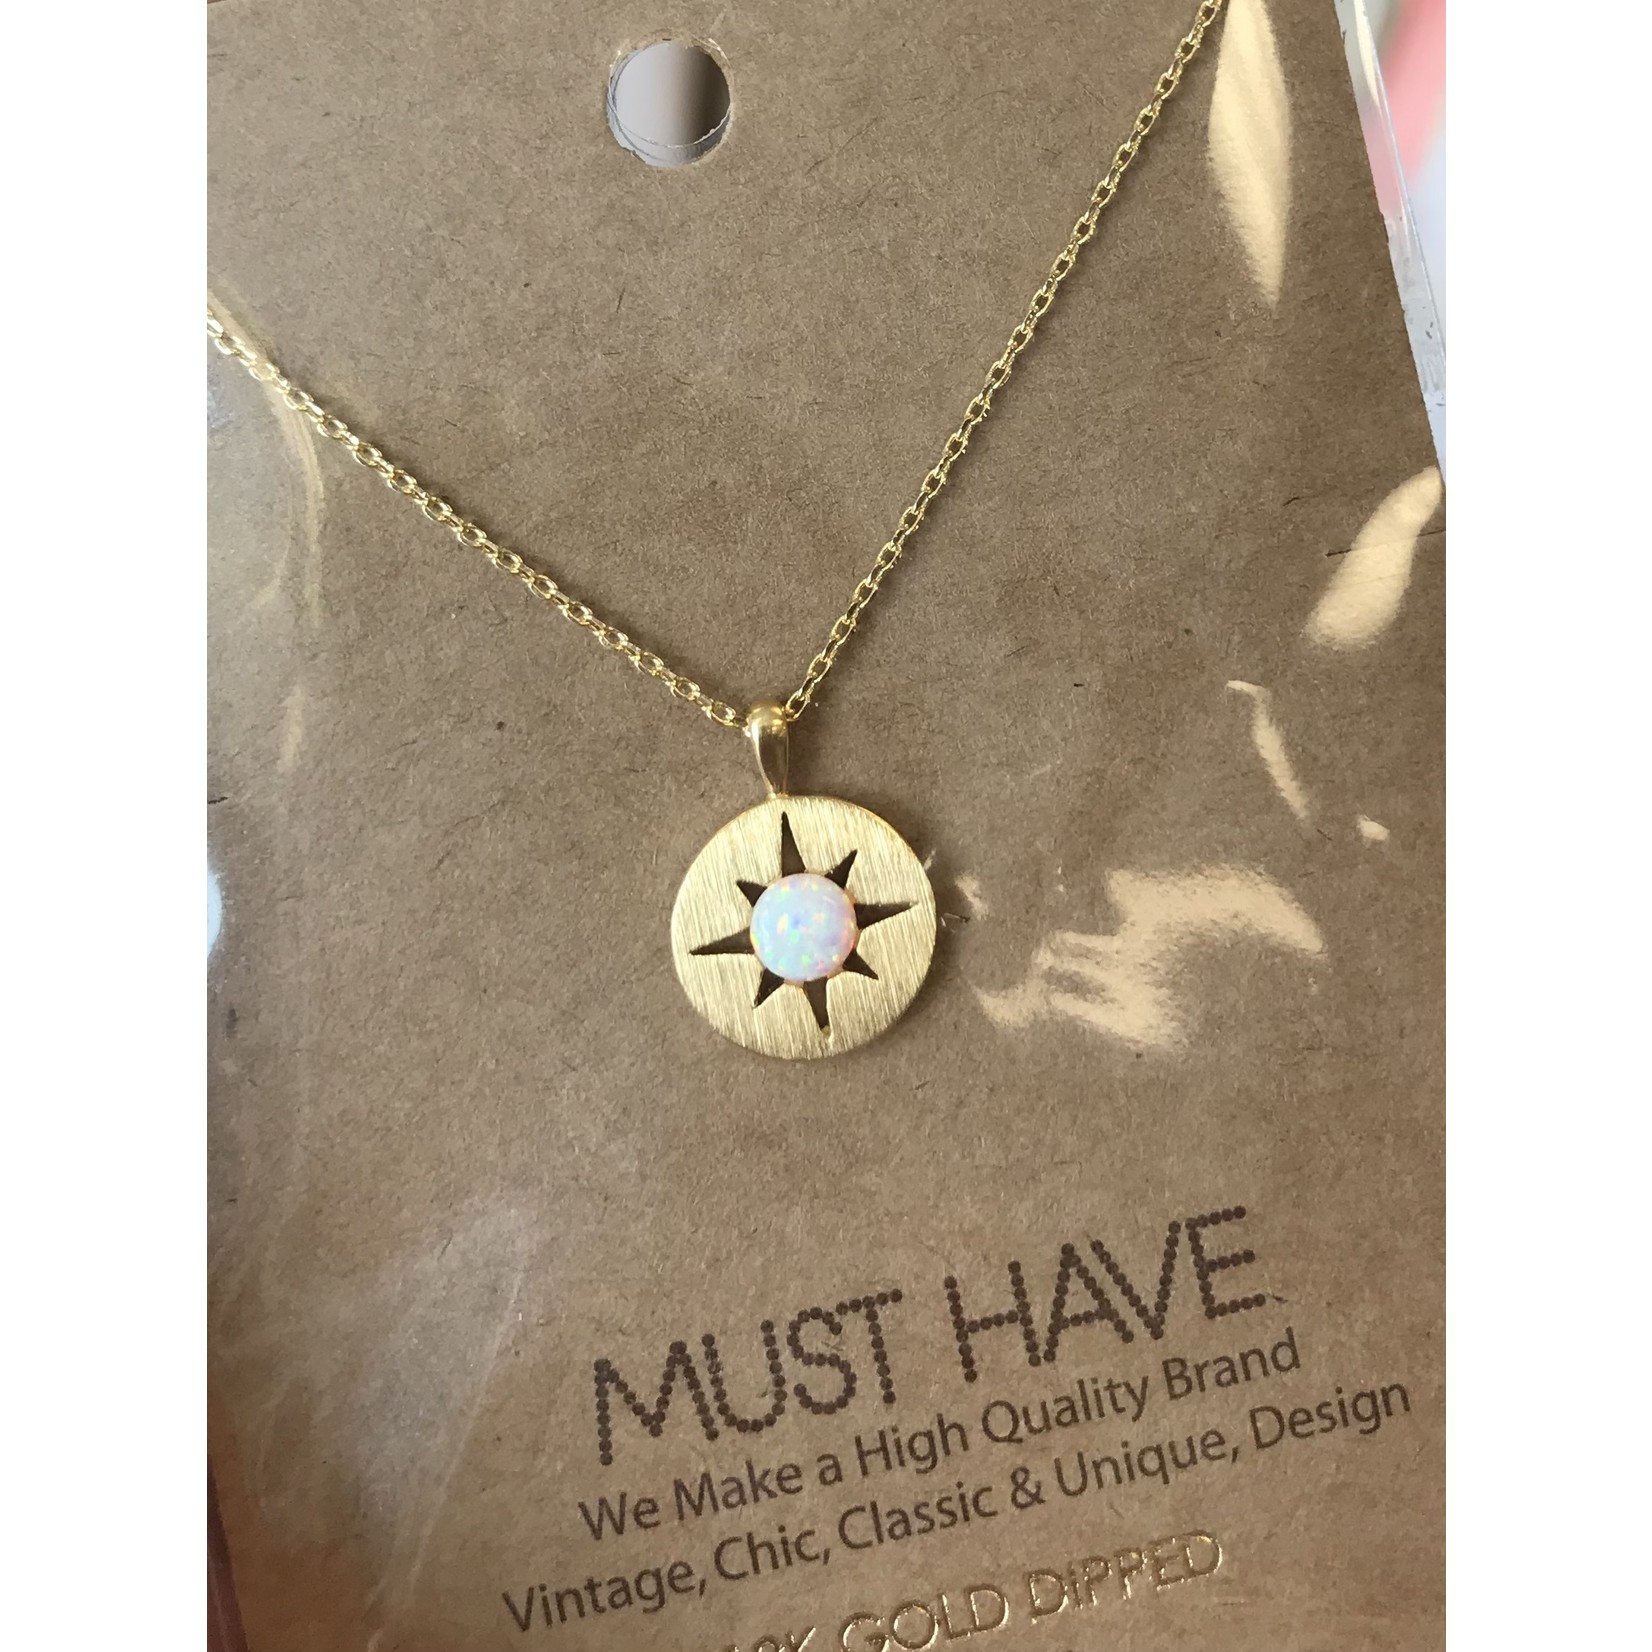 The Round Coin Opal Star Necklace